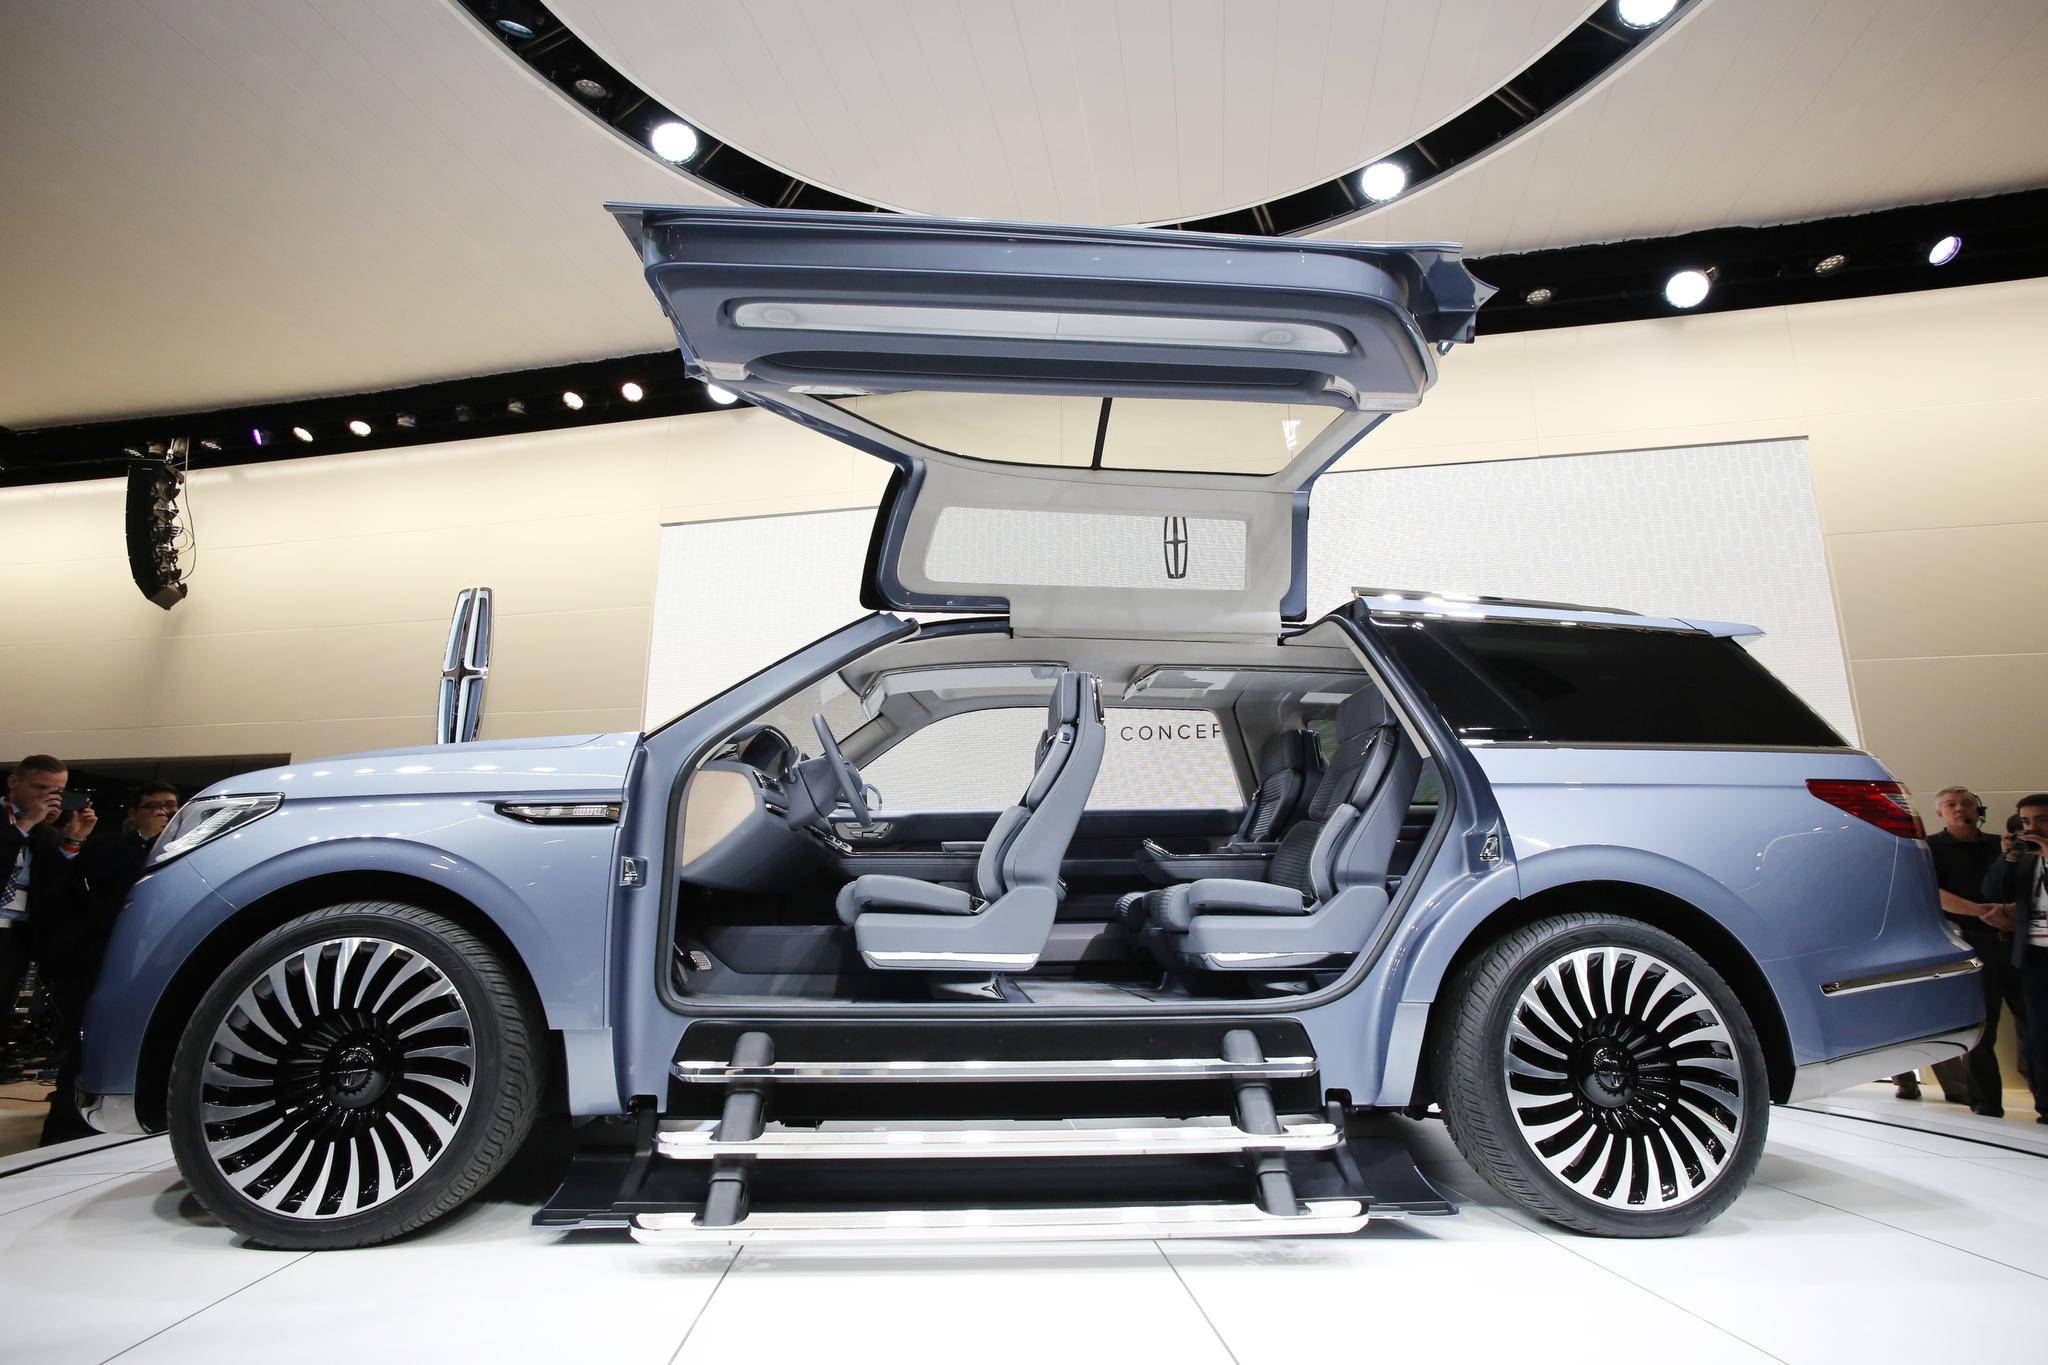 Lincoln's Yacht-Sized Concept SUV Has a Closet and Staircase